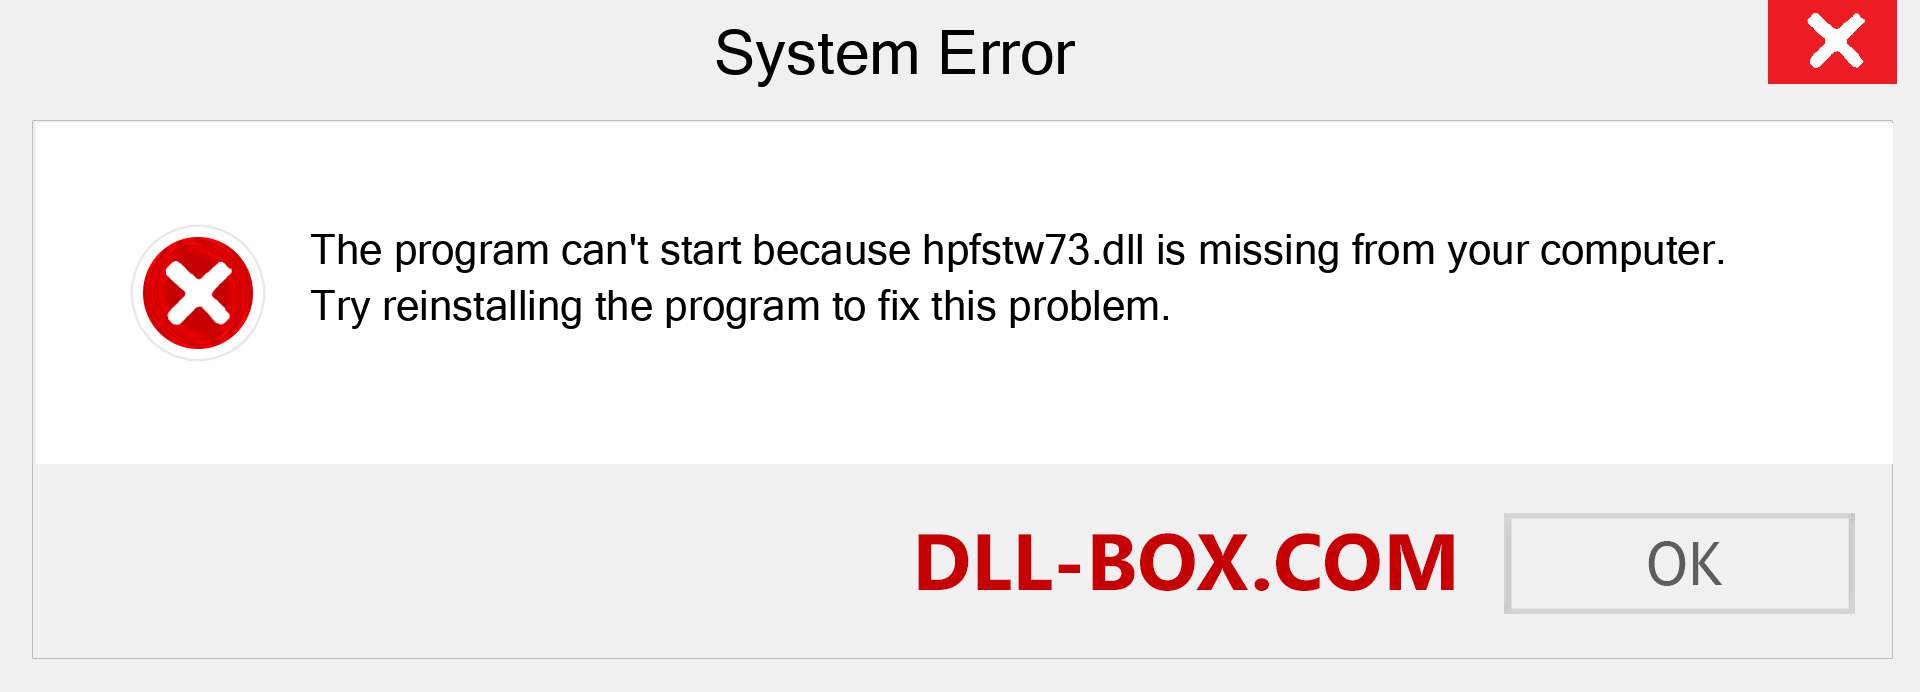  hpfstw73.dll file is missing?. Download for Windows 7, 8, 10 - Fix  hpfstw73 dll Missing Error on Windows, photos, images